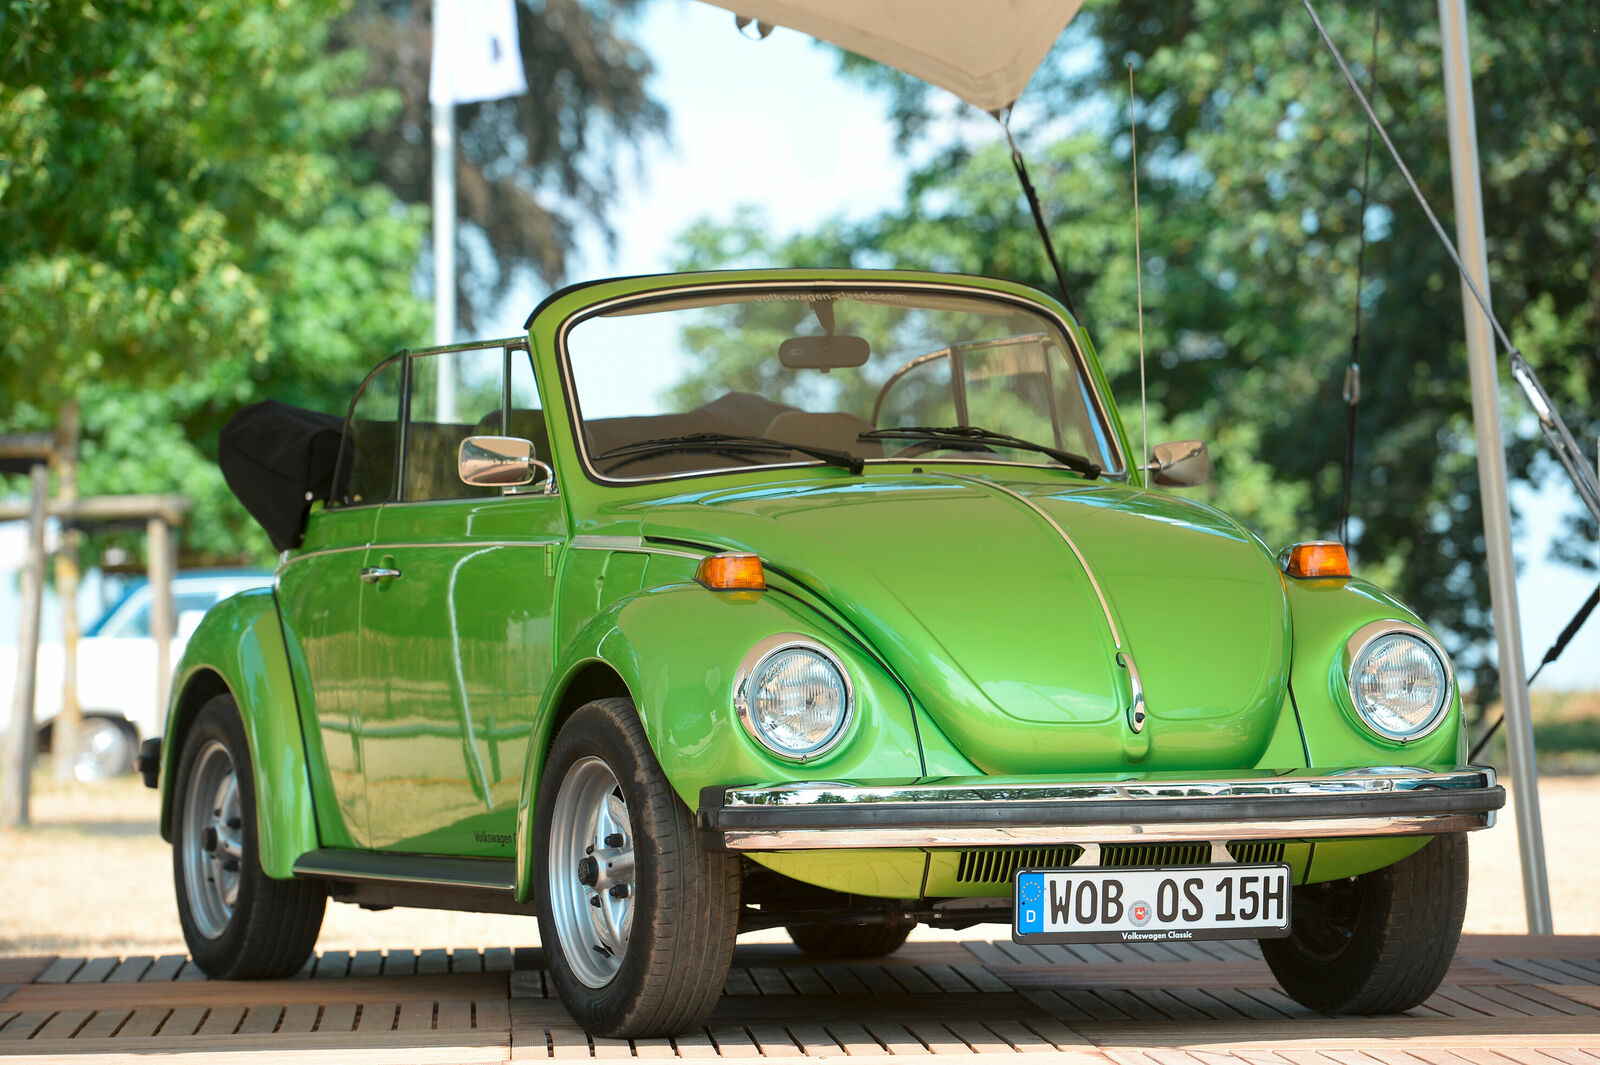 First rally outing for the US model of the 1303 Cabriolet Beetle (1980) from Volkswagen Osnabrück Automobile Collection.